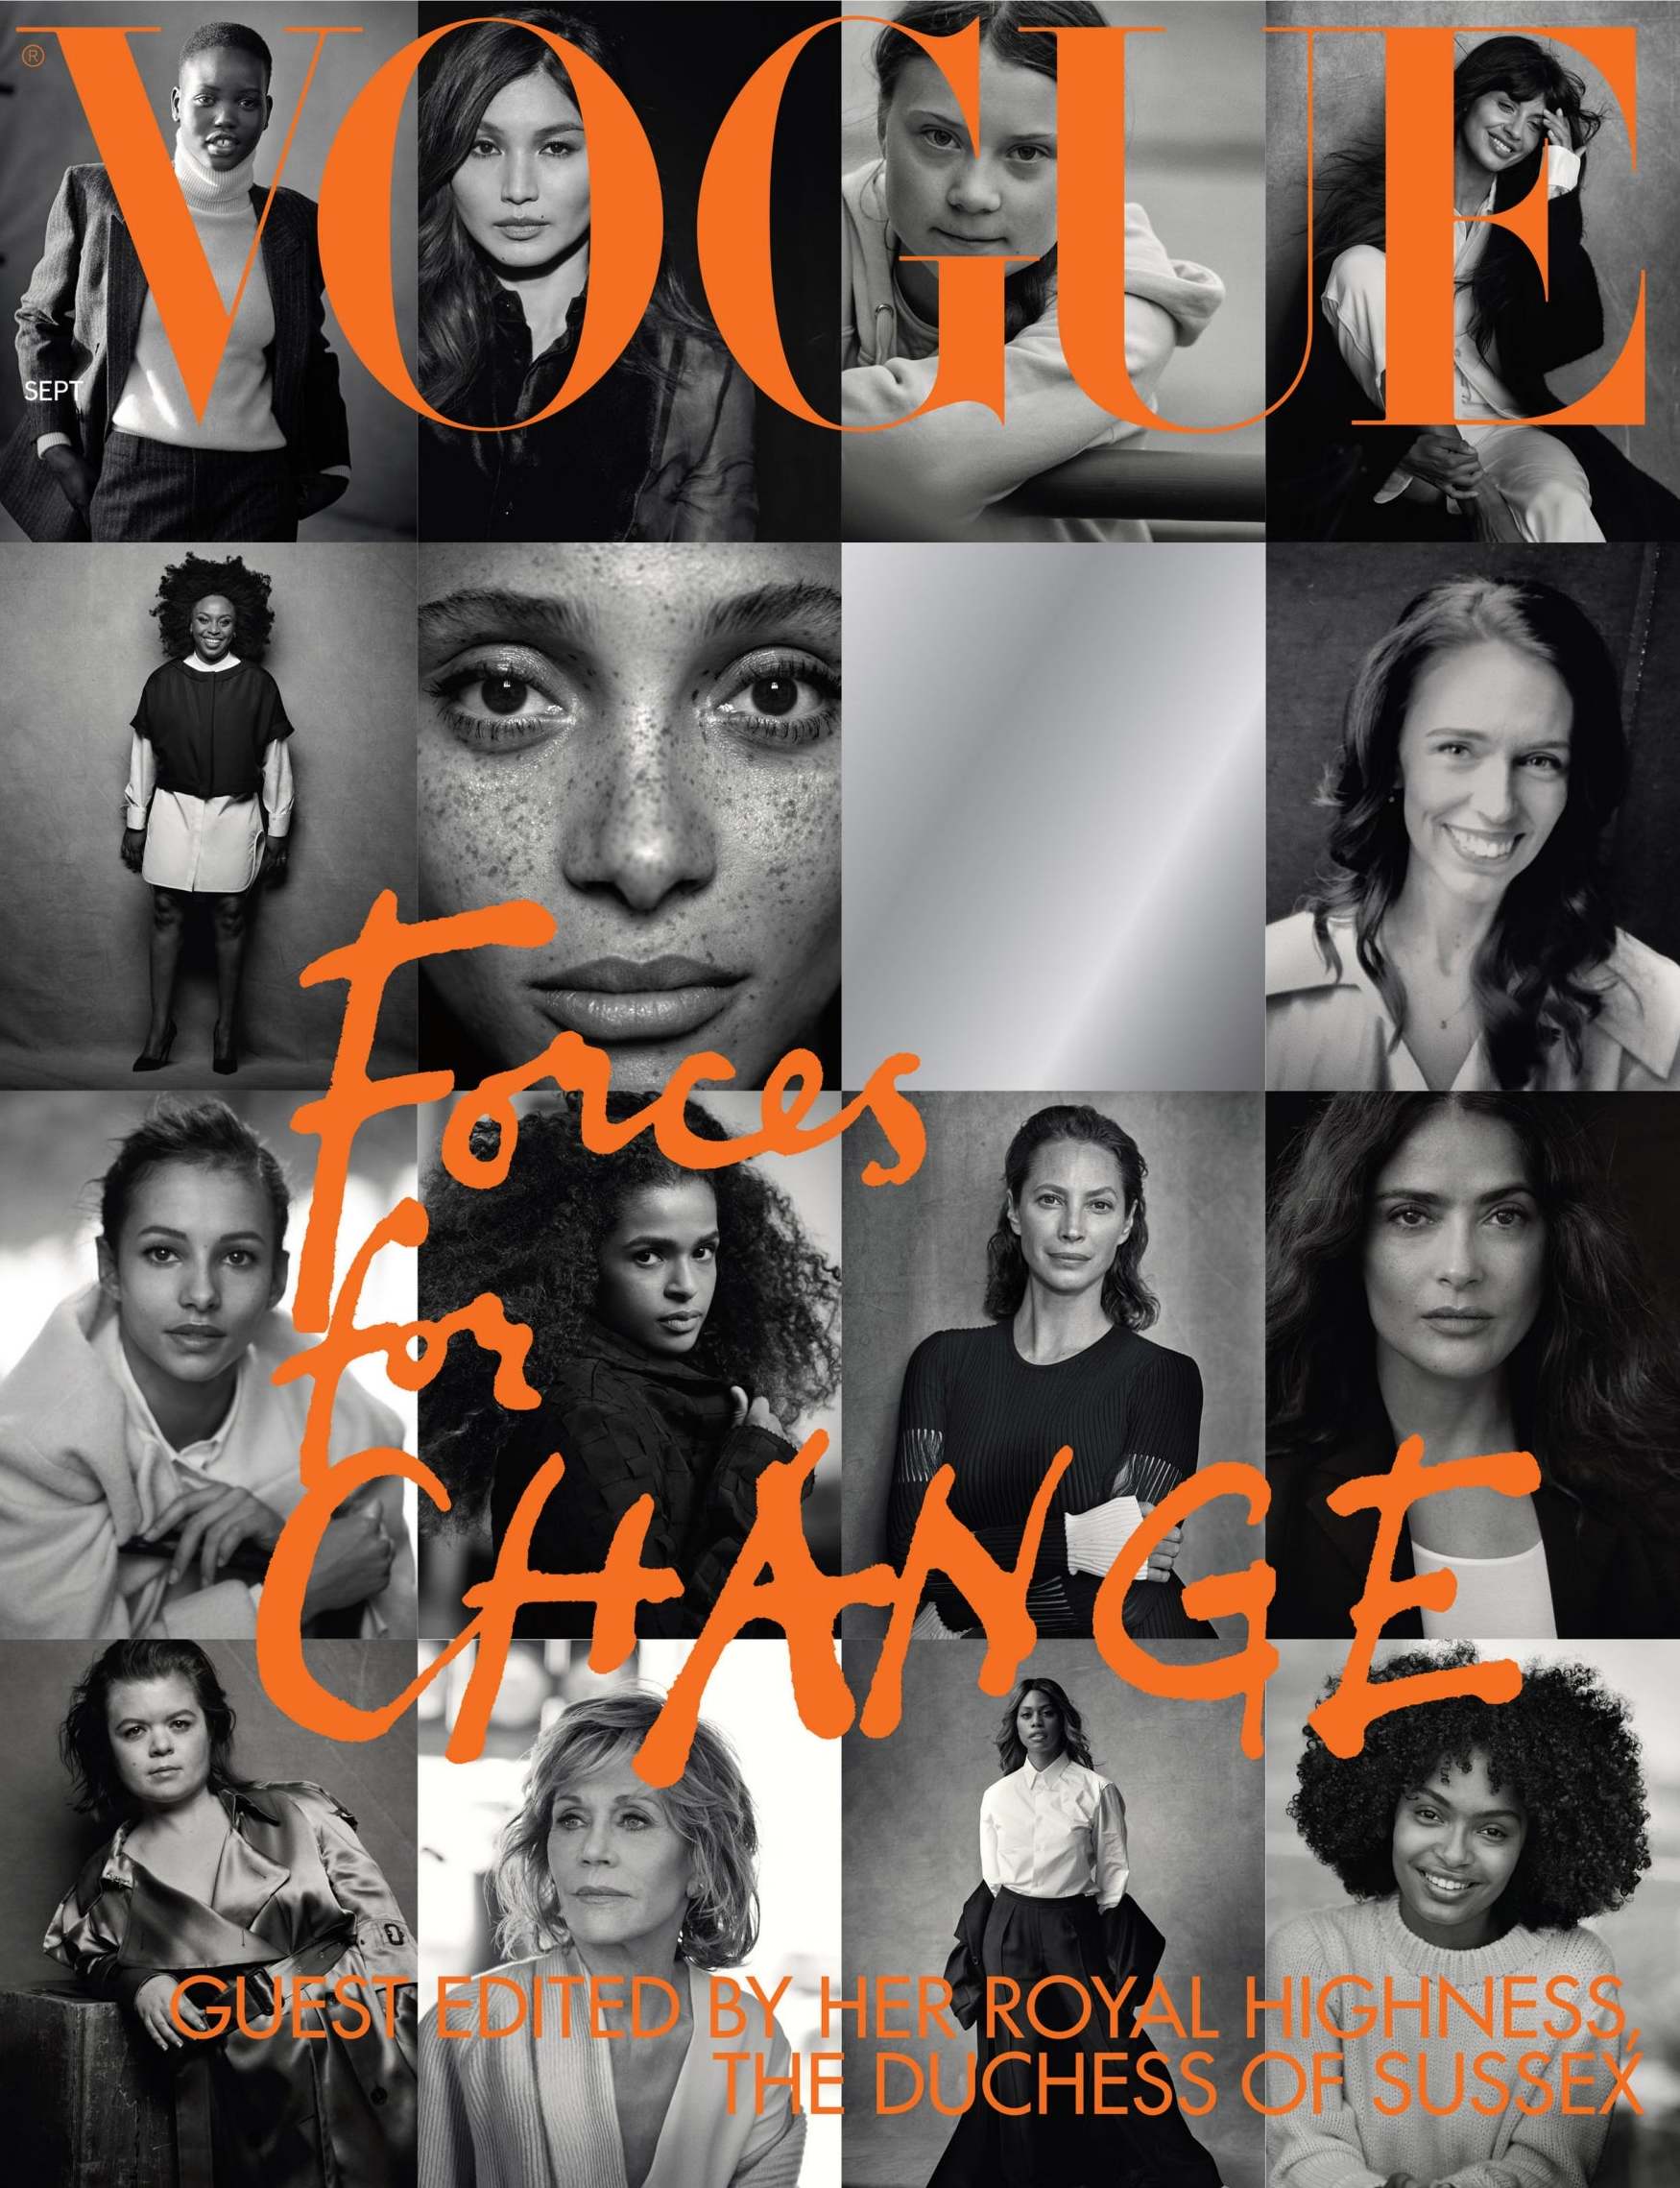 British Vogue's September issue, guest edited by the Duchess of Sussex